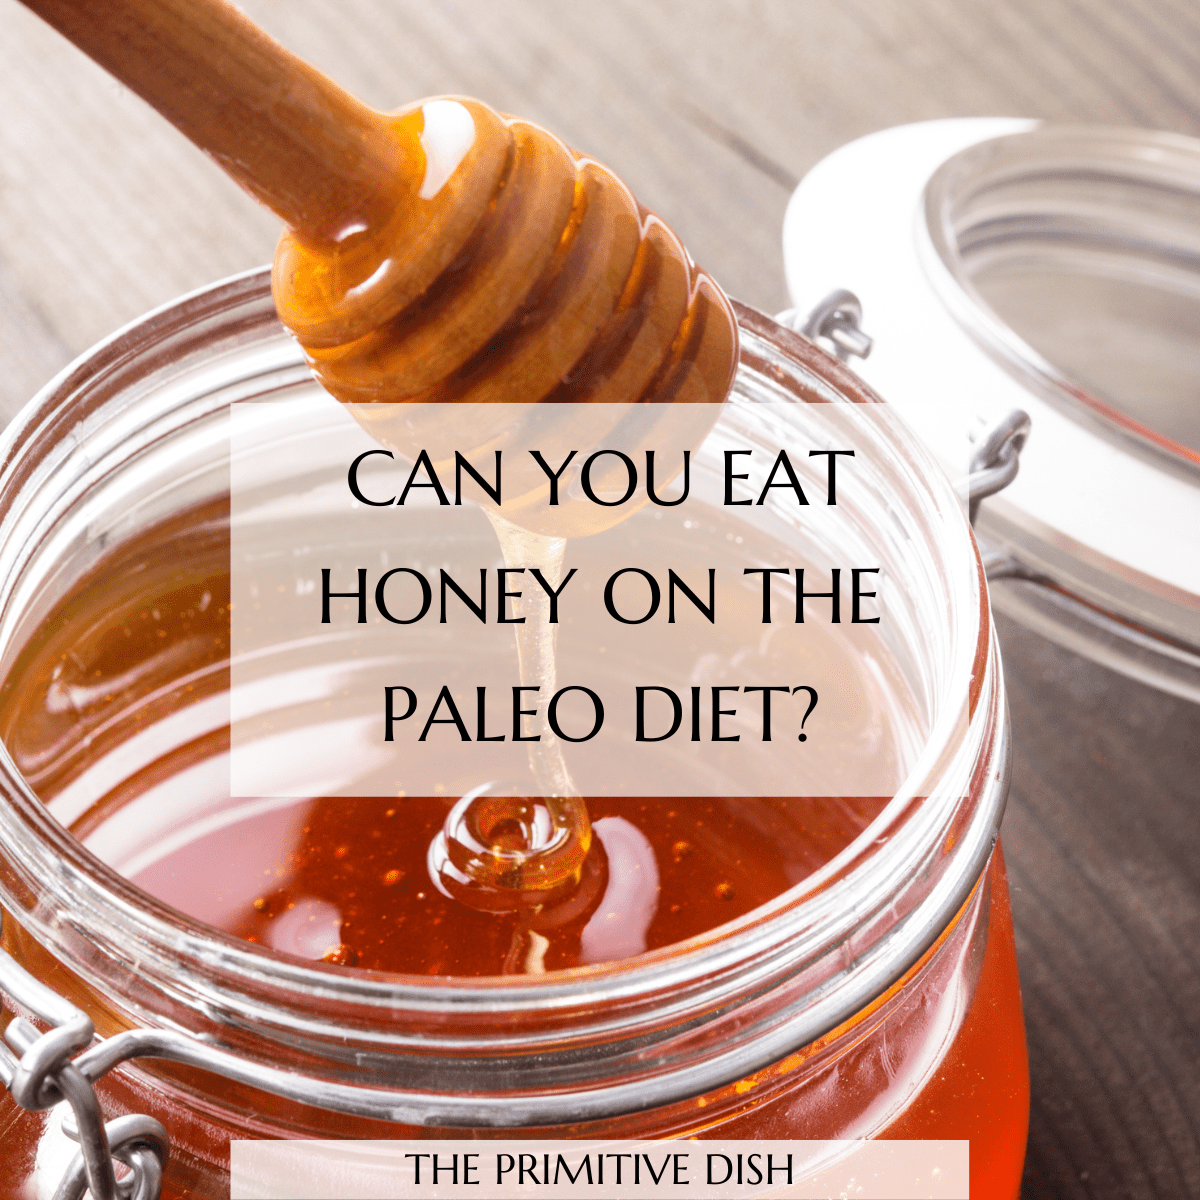 Honey drizzle into a glass jar with the text overlay "Can you eat honey on the paleo diet?"